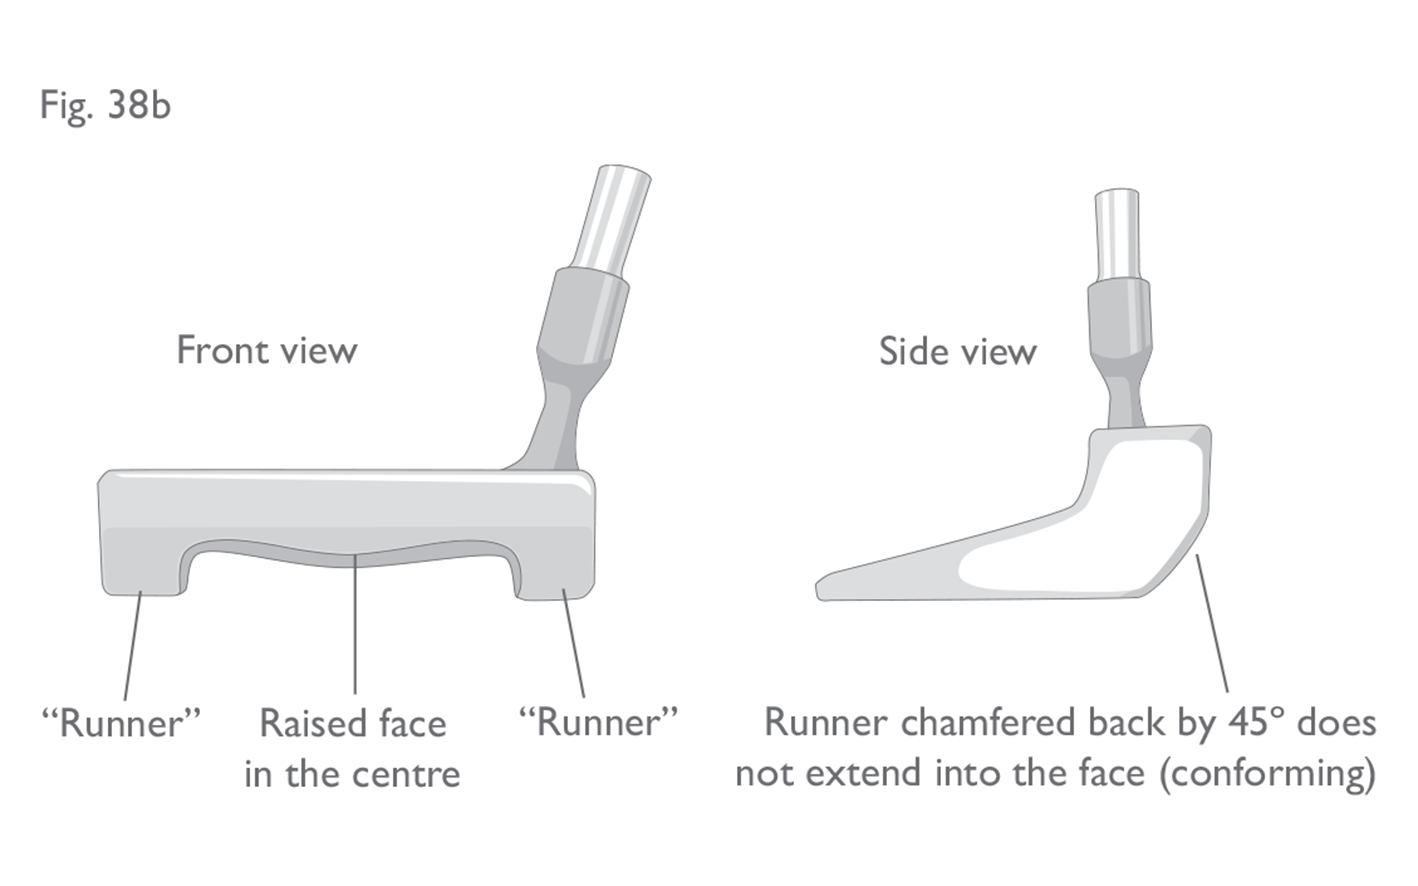 Fig 38 b:  Putter with runners at heel and toe (conforming)